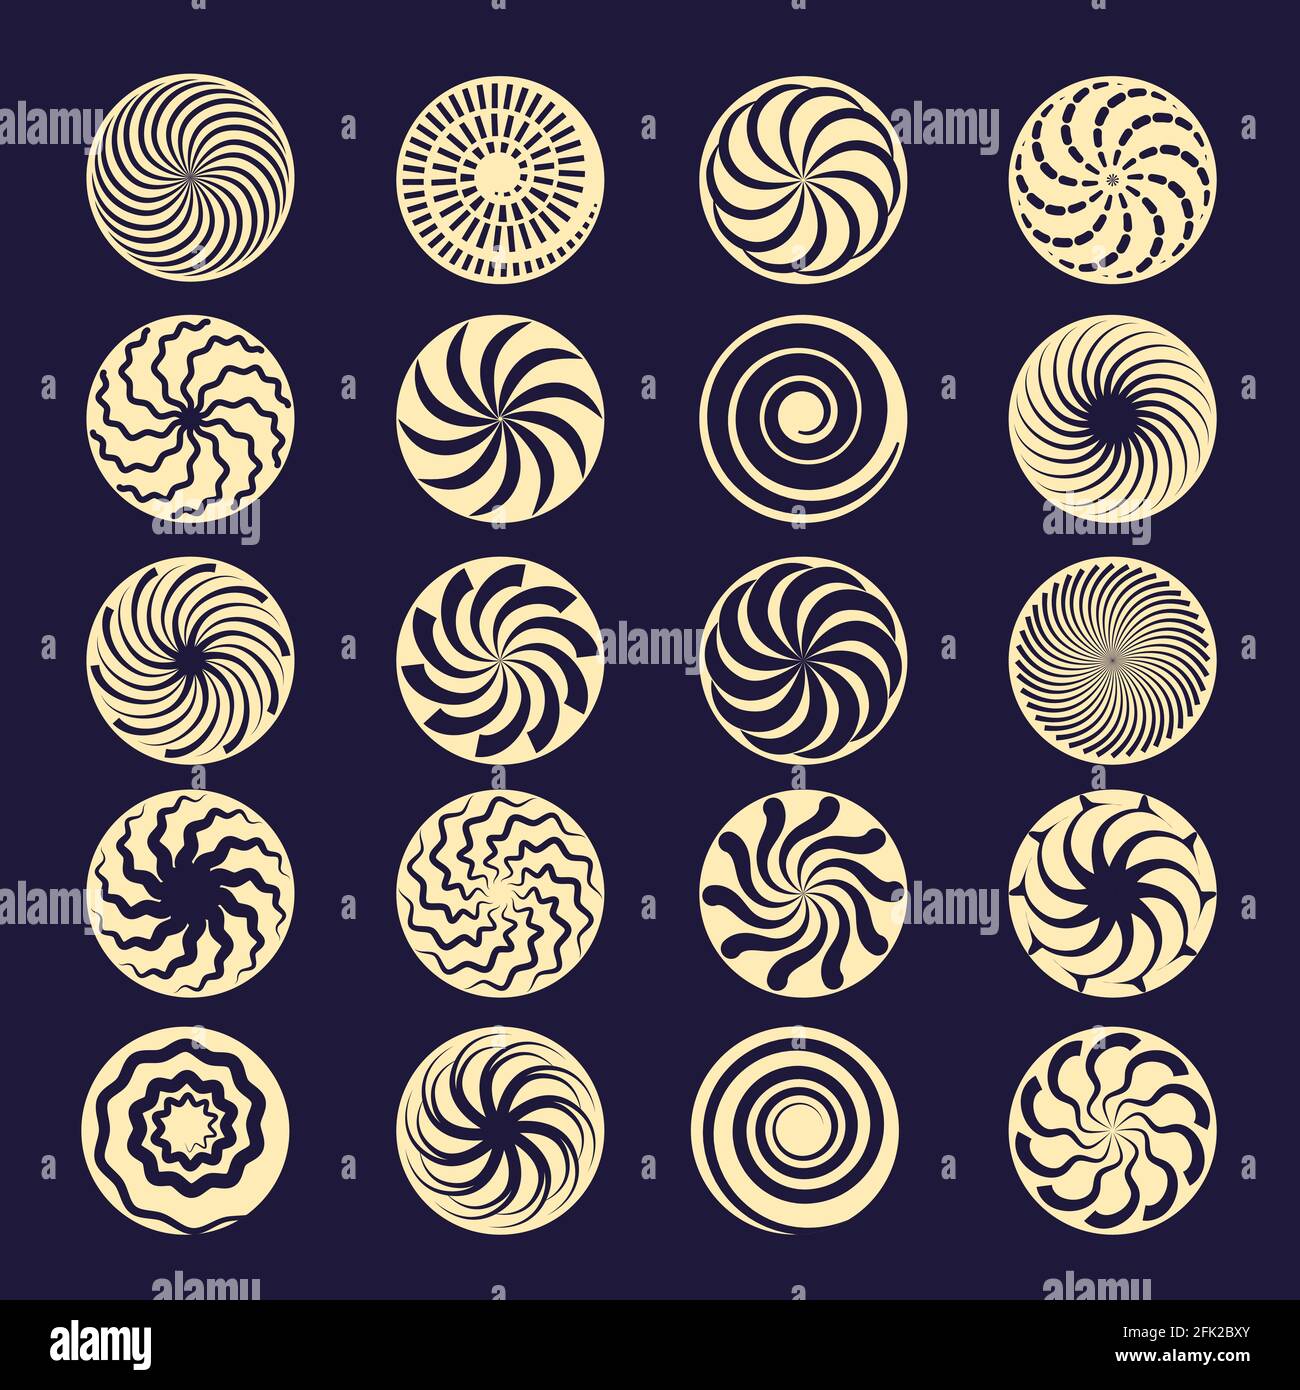 Hypnotic spiral. Black radial motion shapes twirl stroke vector elements Stock Vector